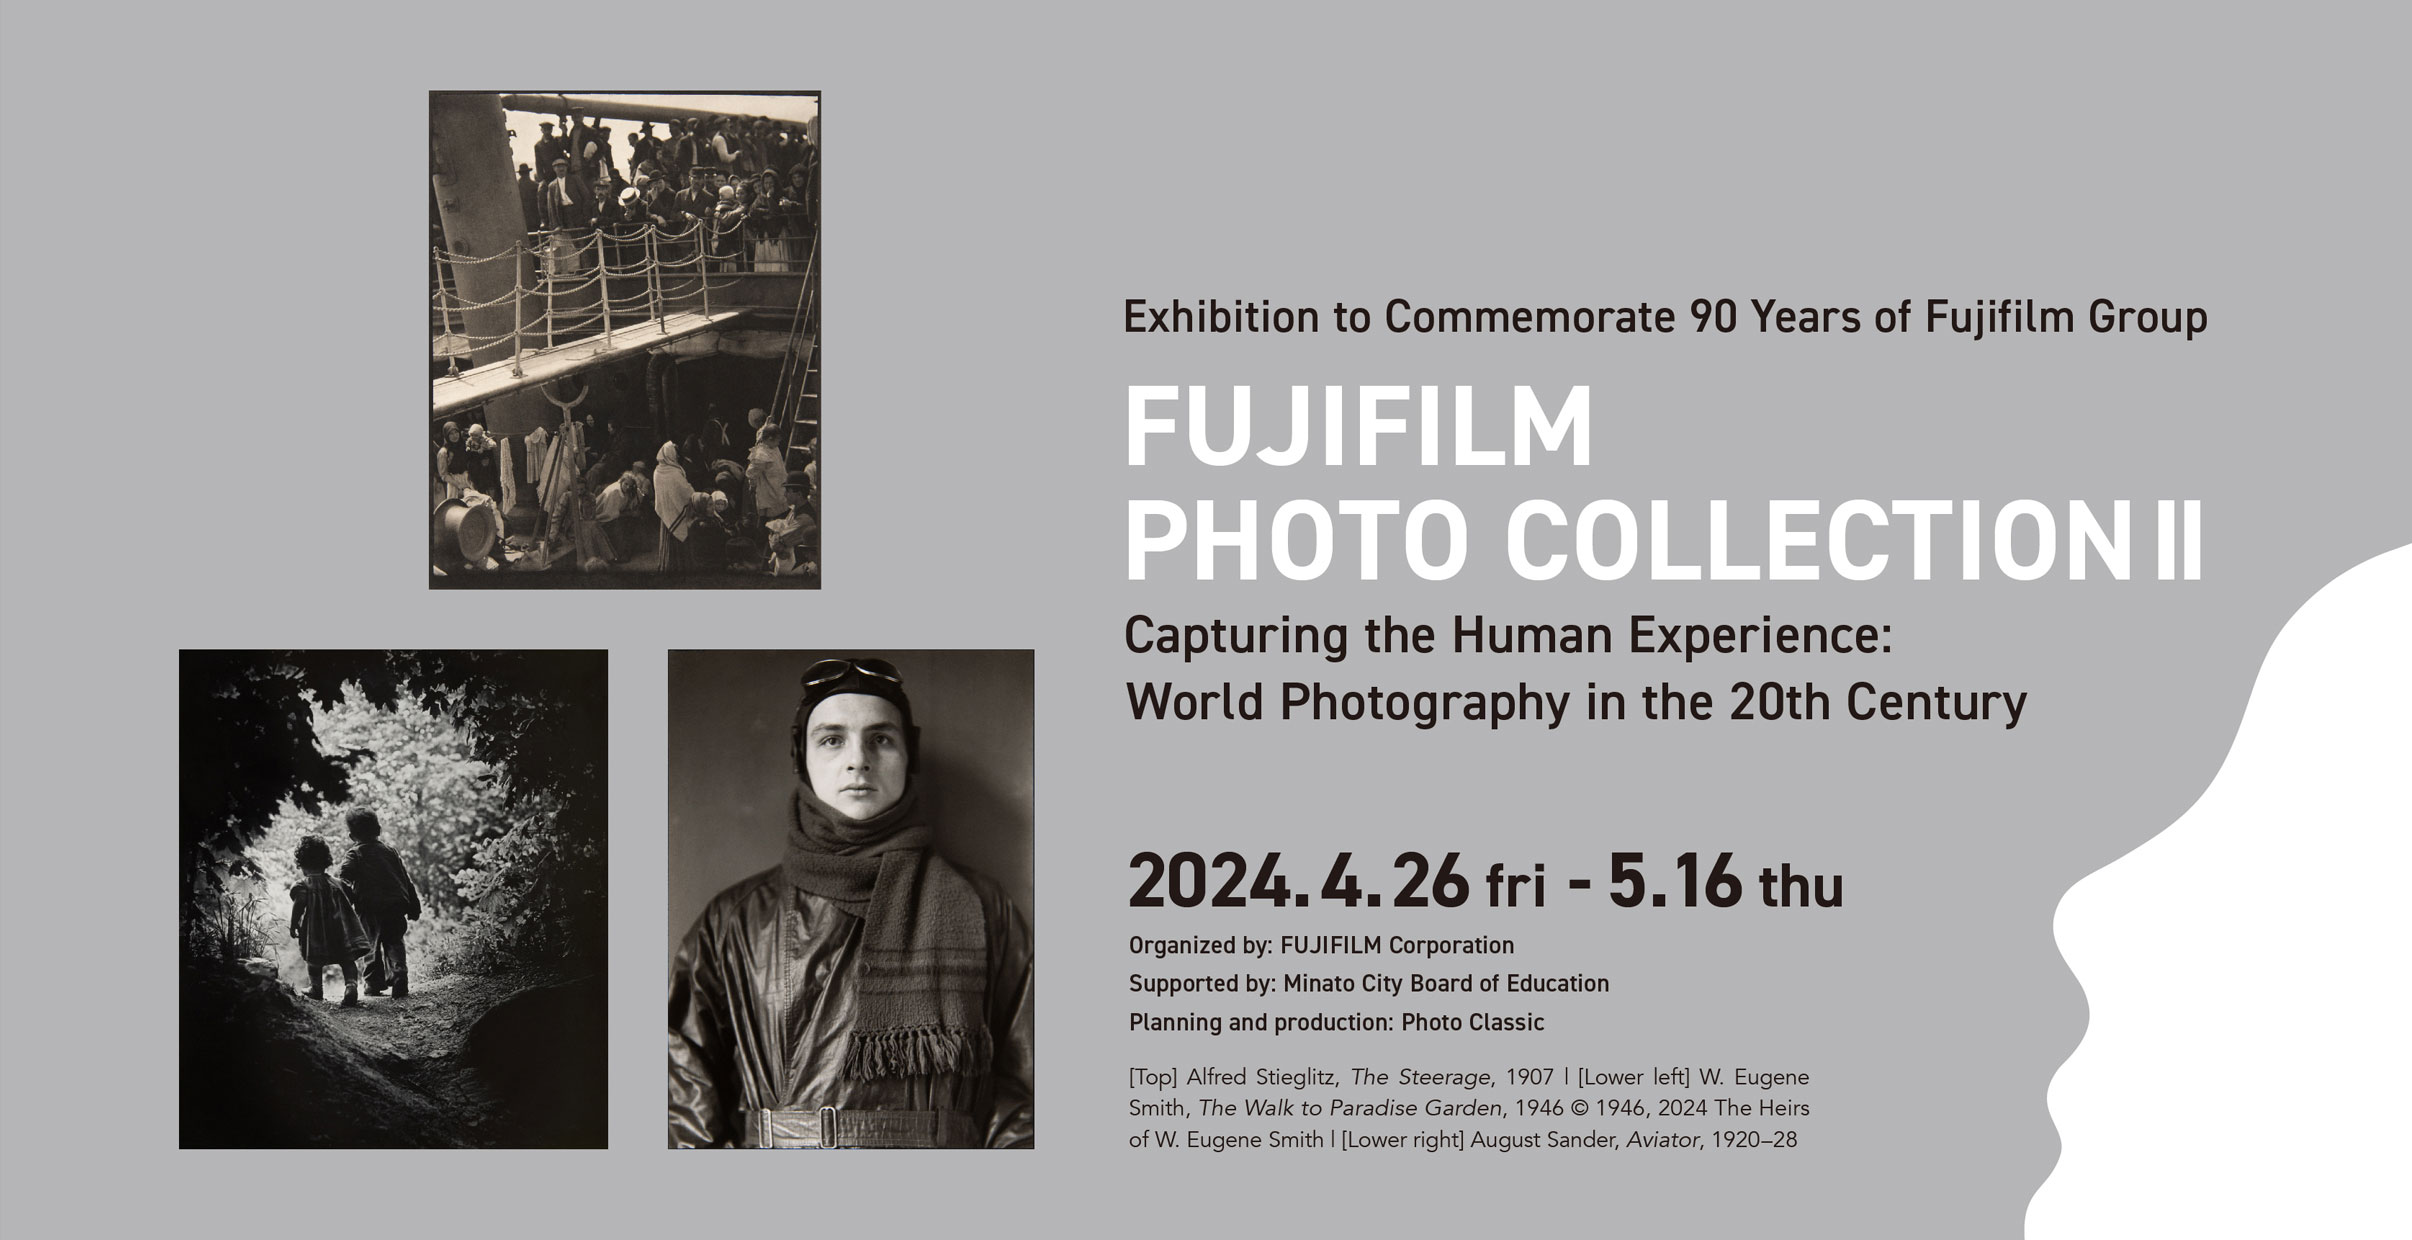 [image]Exhibition to Commemorate 90 Years of Fujifilm Group FUJIFILM Photo Collection II Capturing the Human Experience: World Photography in the 20th Century